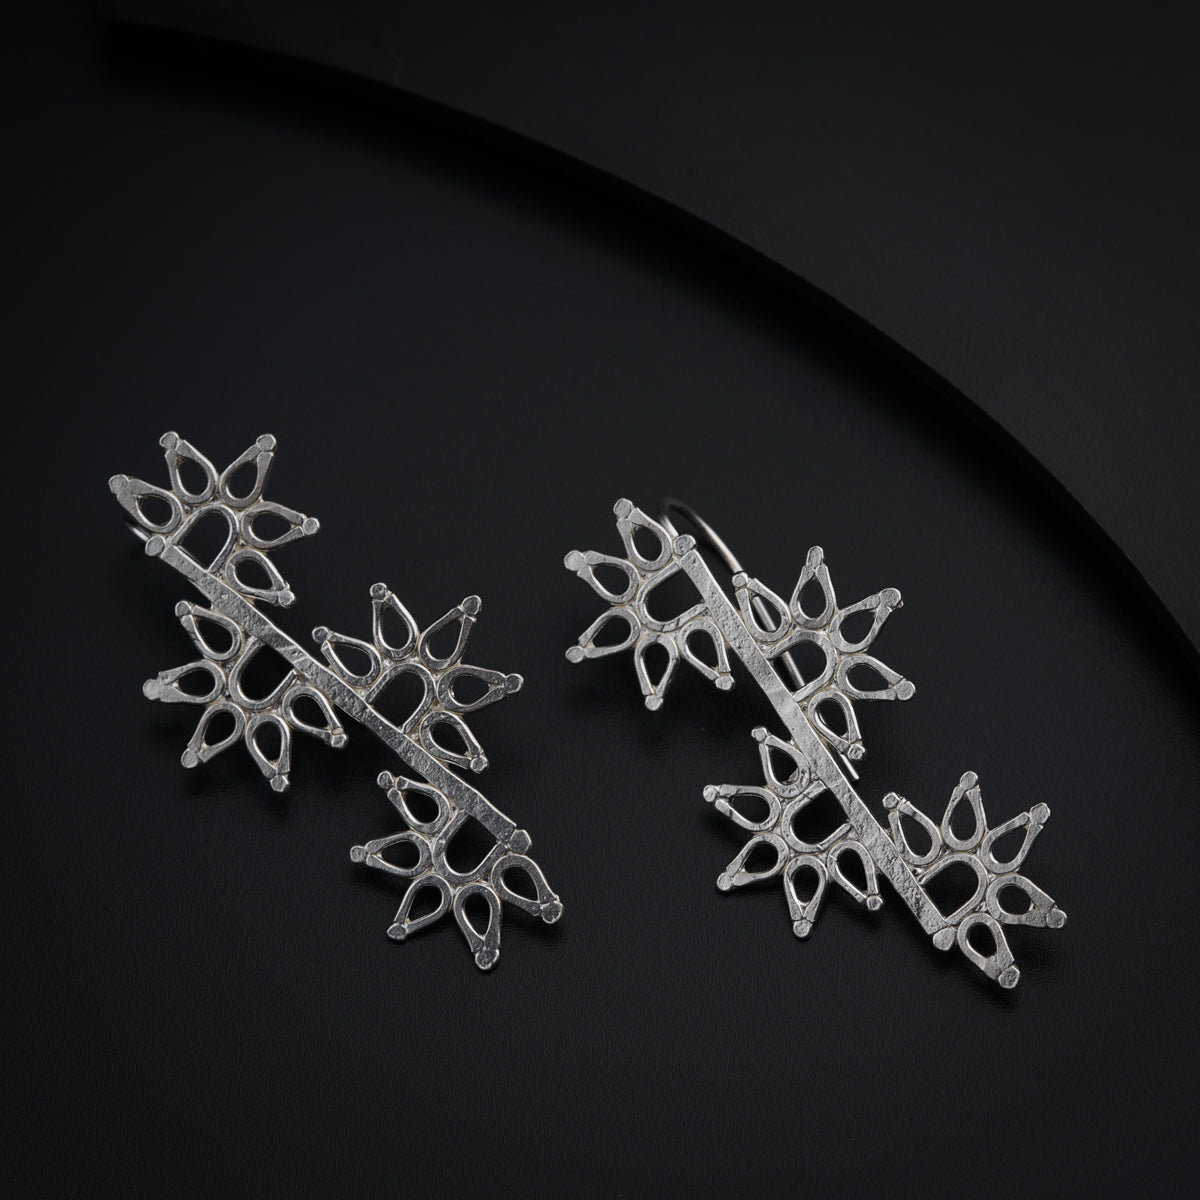 a pair of snowflakes sitting on top of a black surface